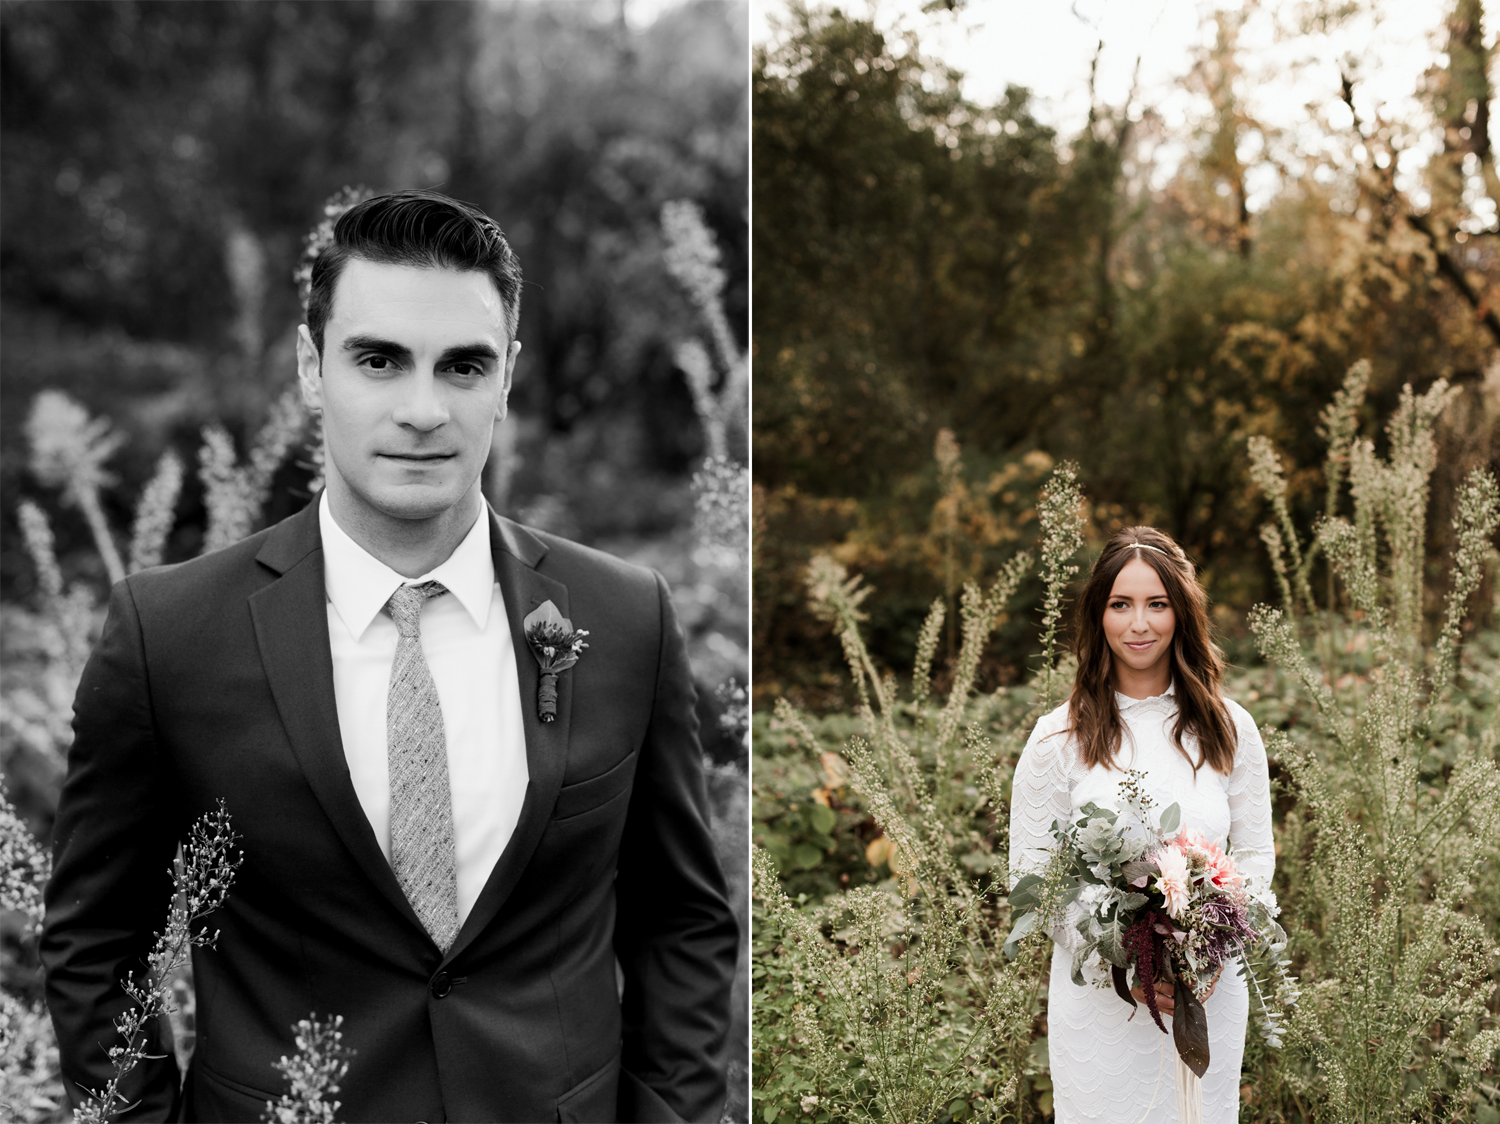 Portraits of a bohemian bride and groom in Chico, California. By Chico Wedding Photographer Briana Morrison